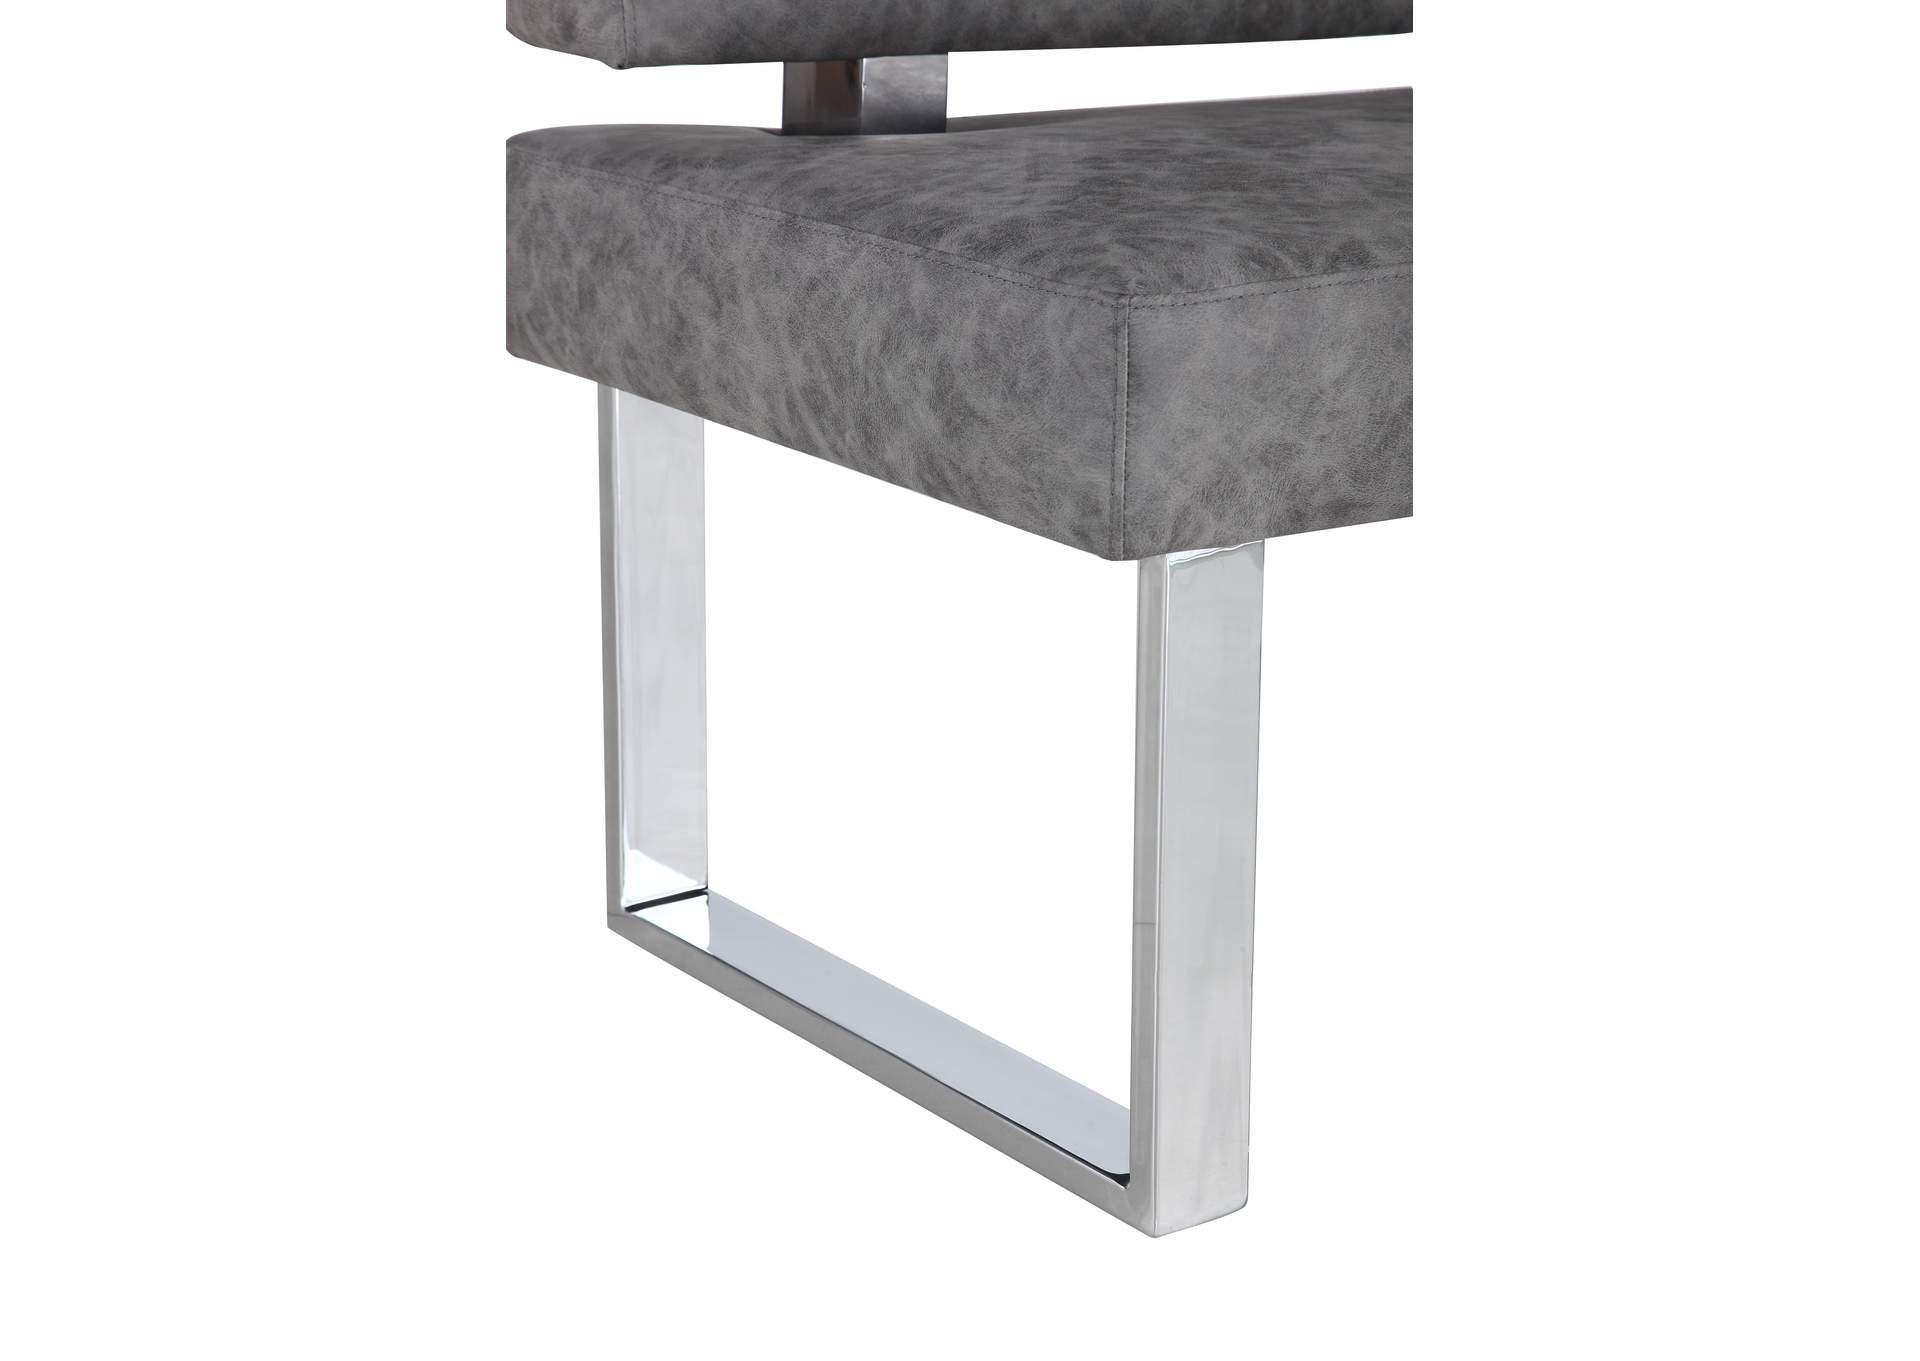 Genevieve Polished SS Modern Gray Reversible Upholstered Nook,Chintaly Imports